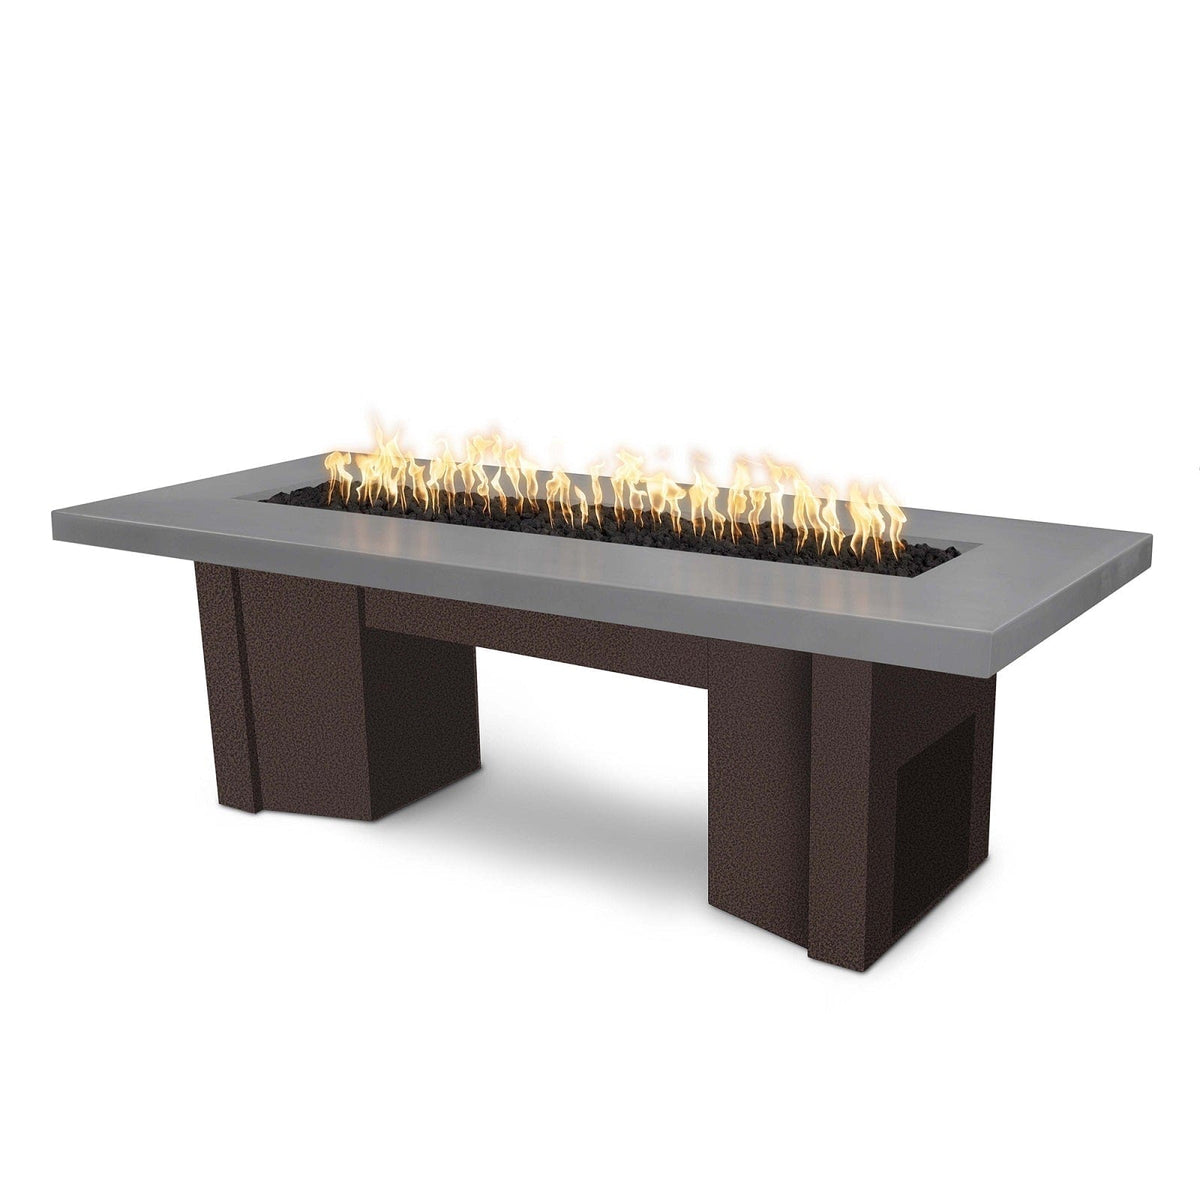 The Outdoor Plus Fire Features Natural Gray (-NGY) / Copper Vein Powder Coated Steel (-CPV) The Outdoor Plus 78&quot; Alameda Fire Table Smooth Concrete in Liquid Propane - Match Lit with Flame Sense System / OPT-ALMGFRC78FSML-LP